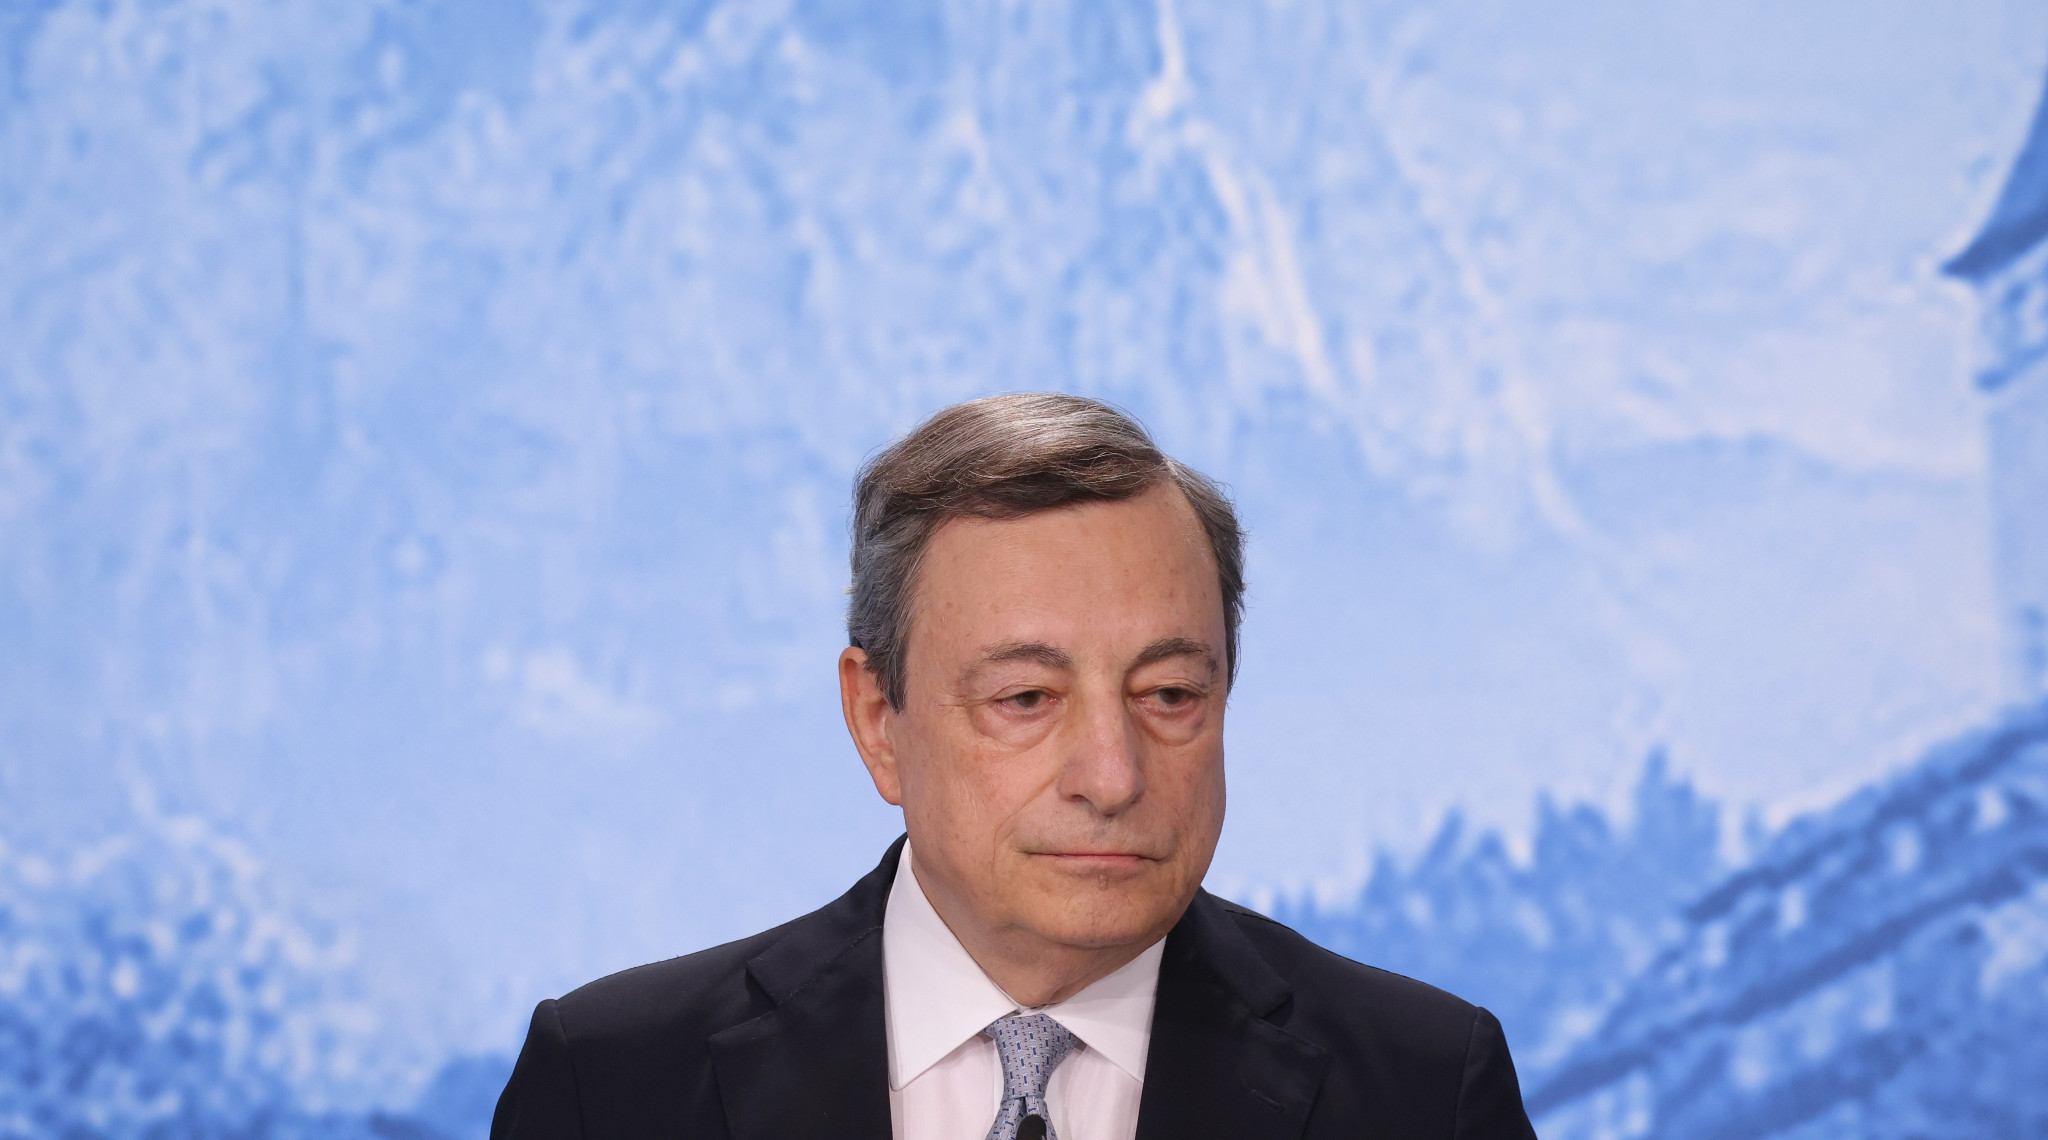 Italian Prime Minister Mario Draghi is stepping down and any changes to the Milan Cortina 2026 Organising Committee are not expected to take place until his successor is in office ©Getty Images